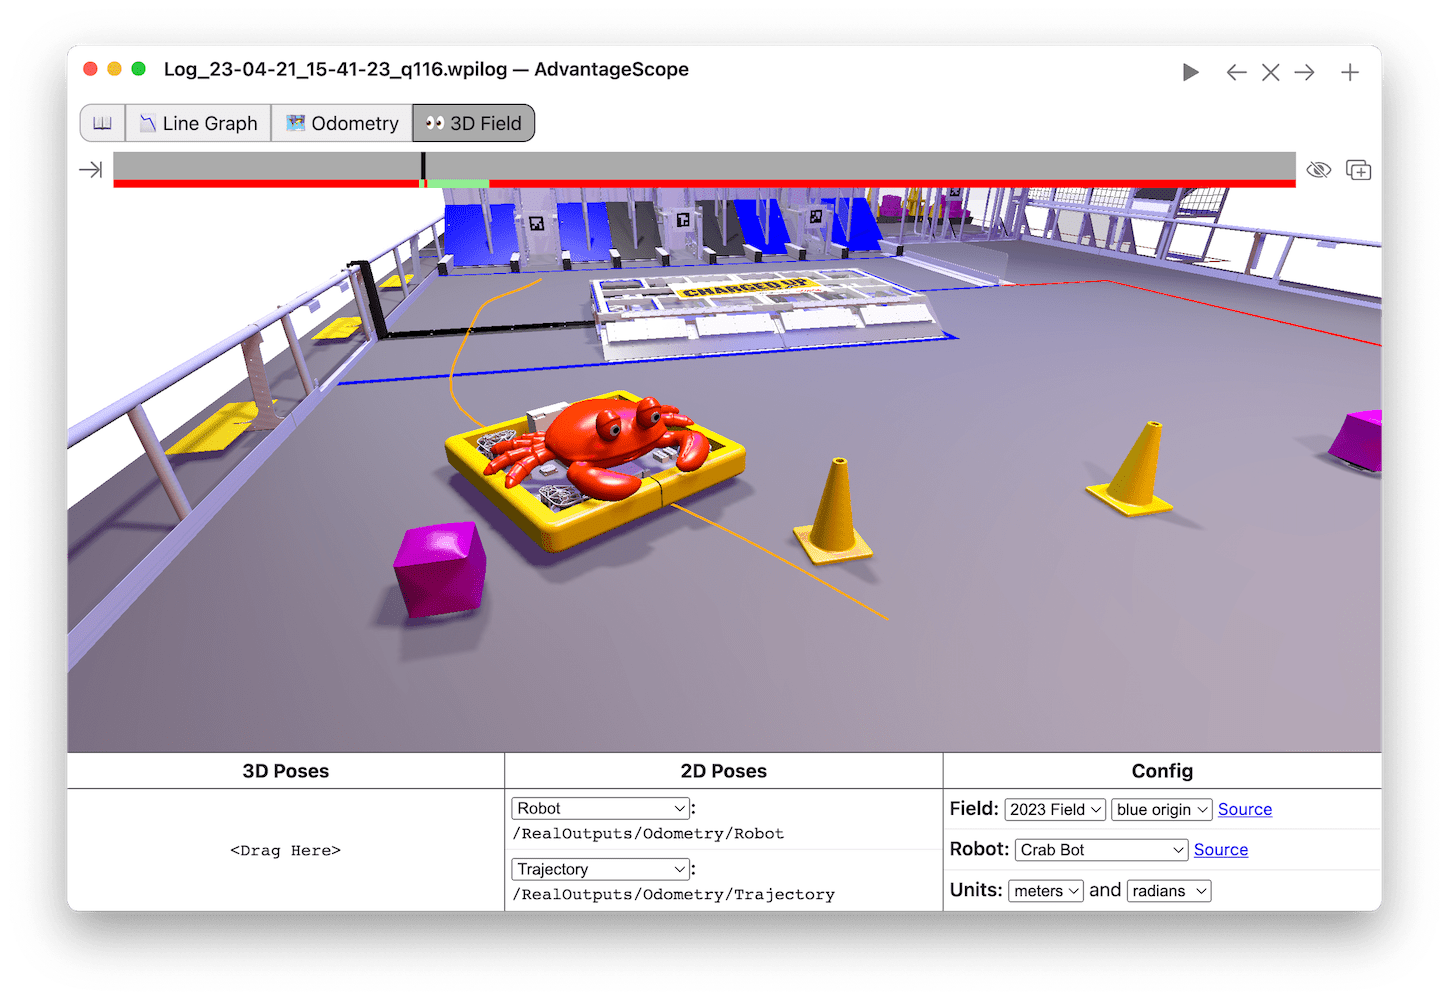 Screenshot of an AdvantageScope window displaying a robot and trajectory on a 3D field.